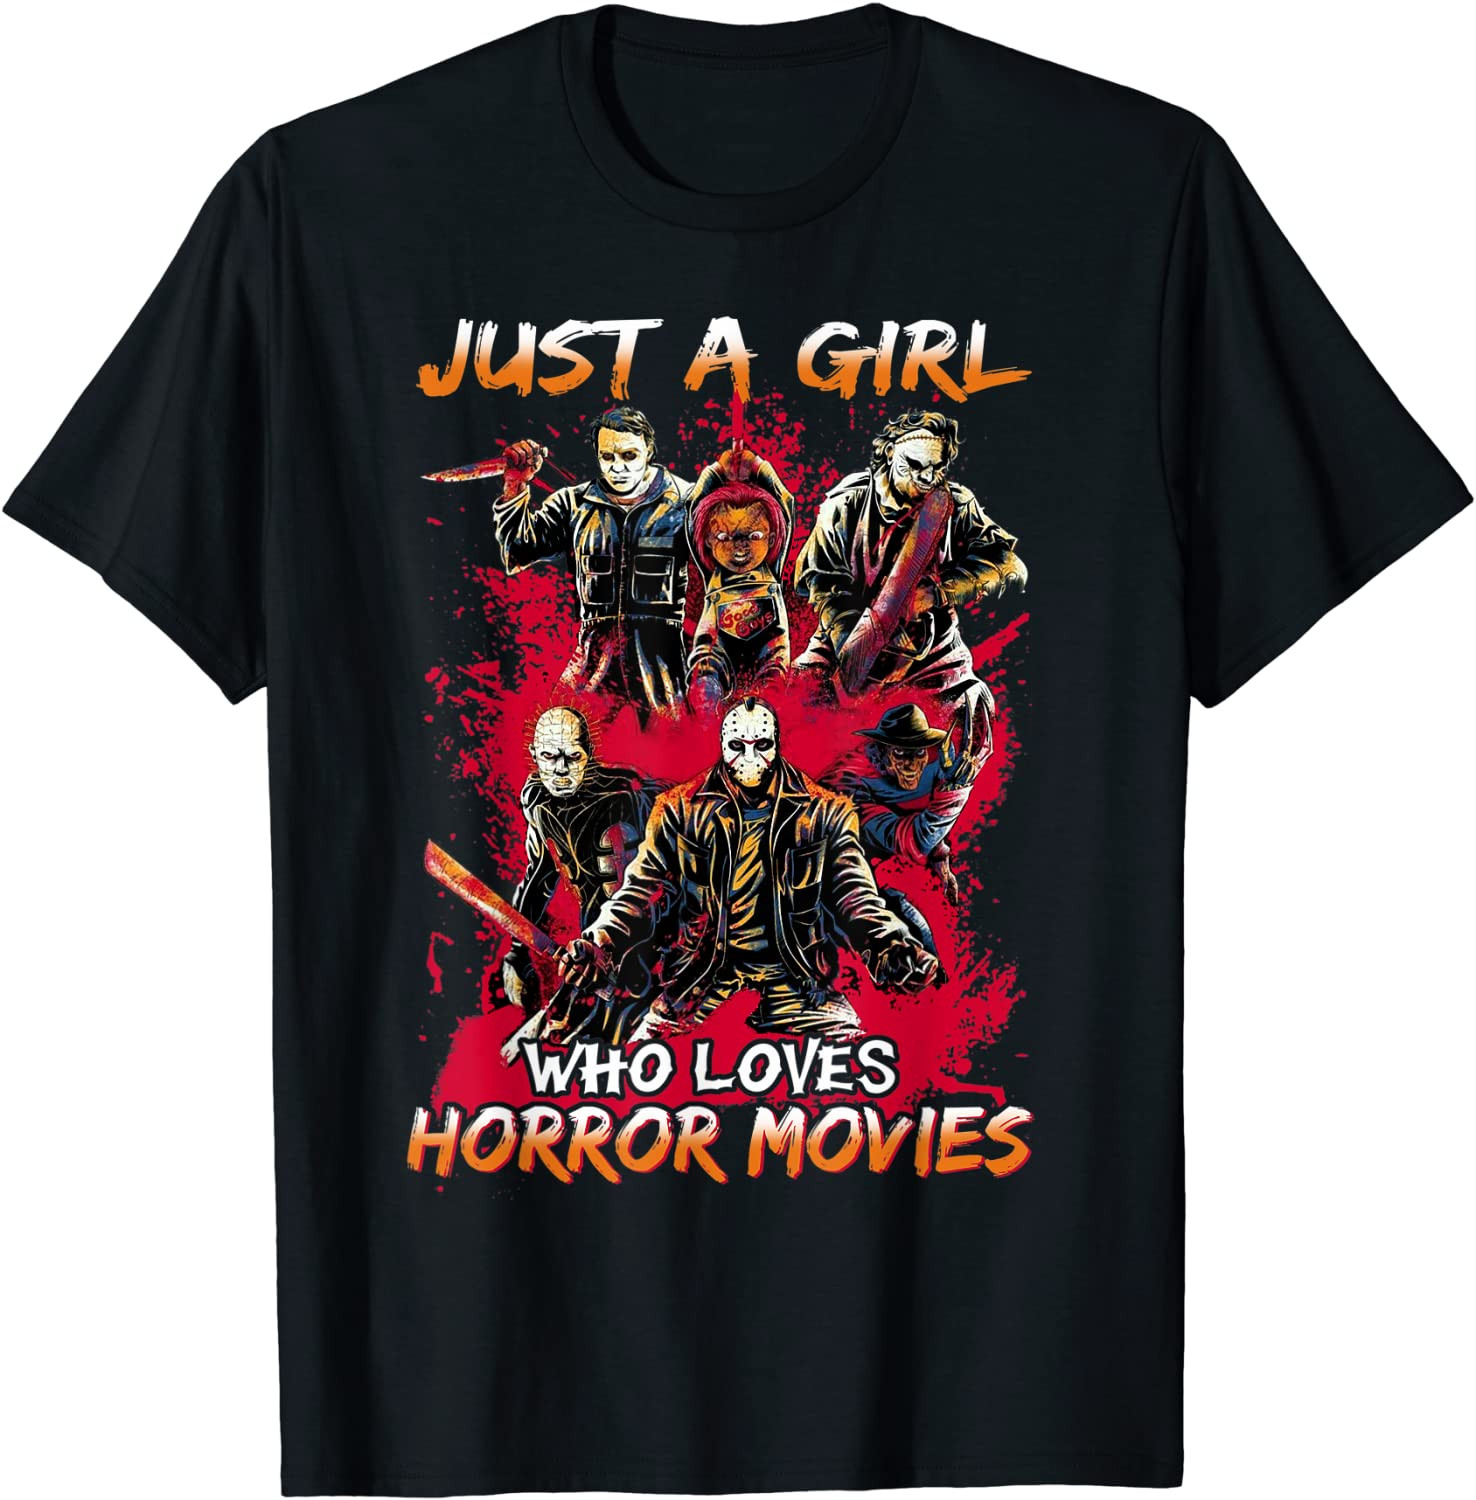 Just A Girl Who Loves Horror Movies Halloween Costume T-Shirt